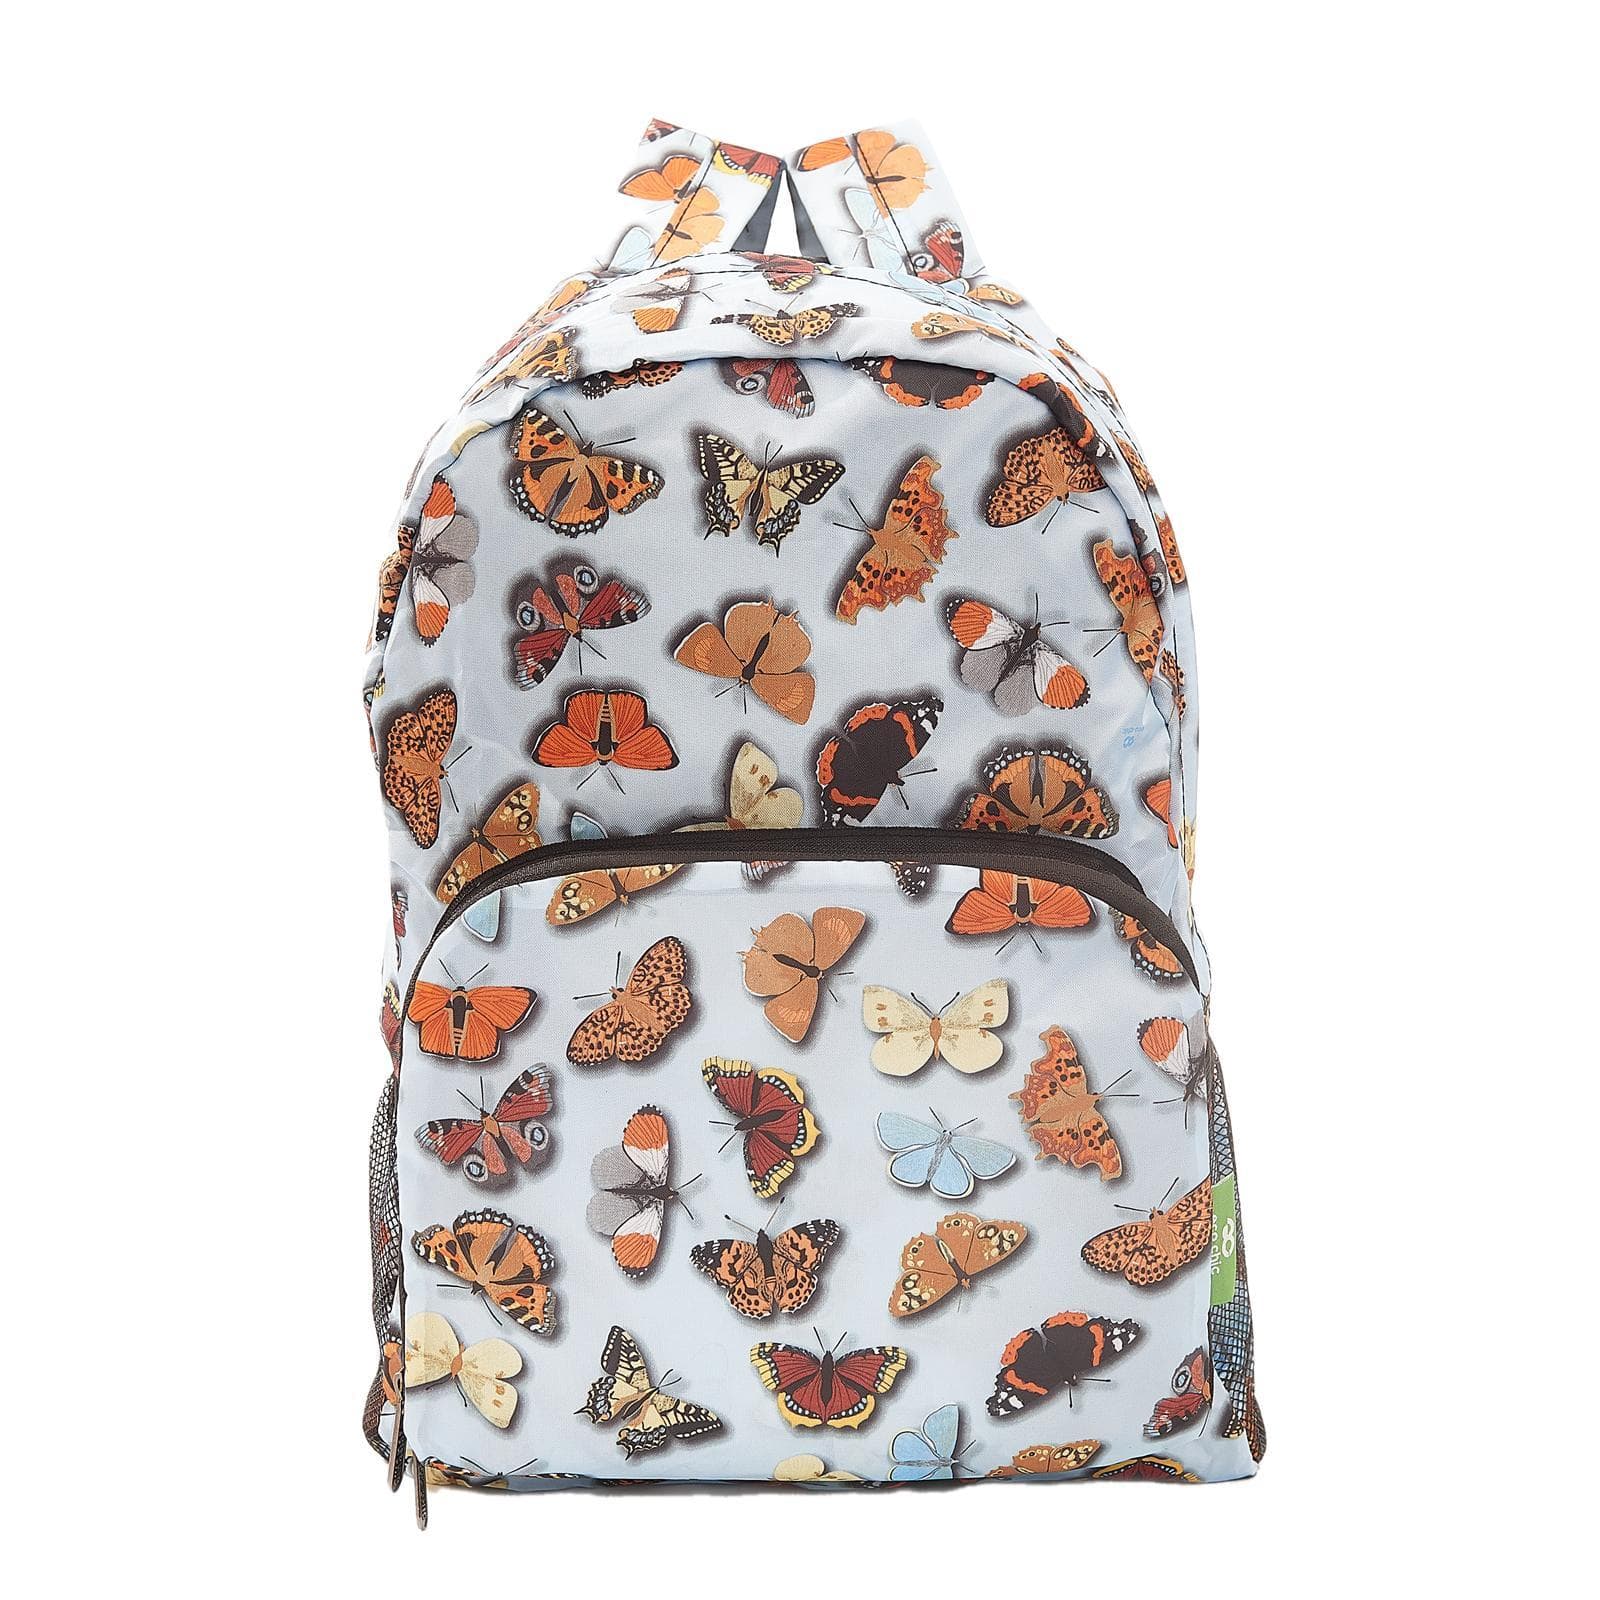 Eco Chic Eco Chic Lightweight Foldable Backpack Wild Butterflies